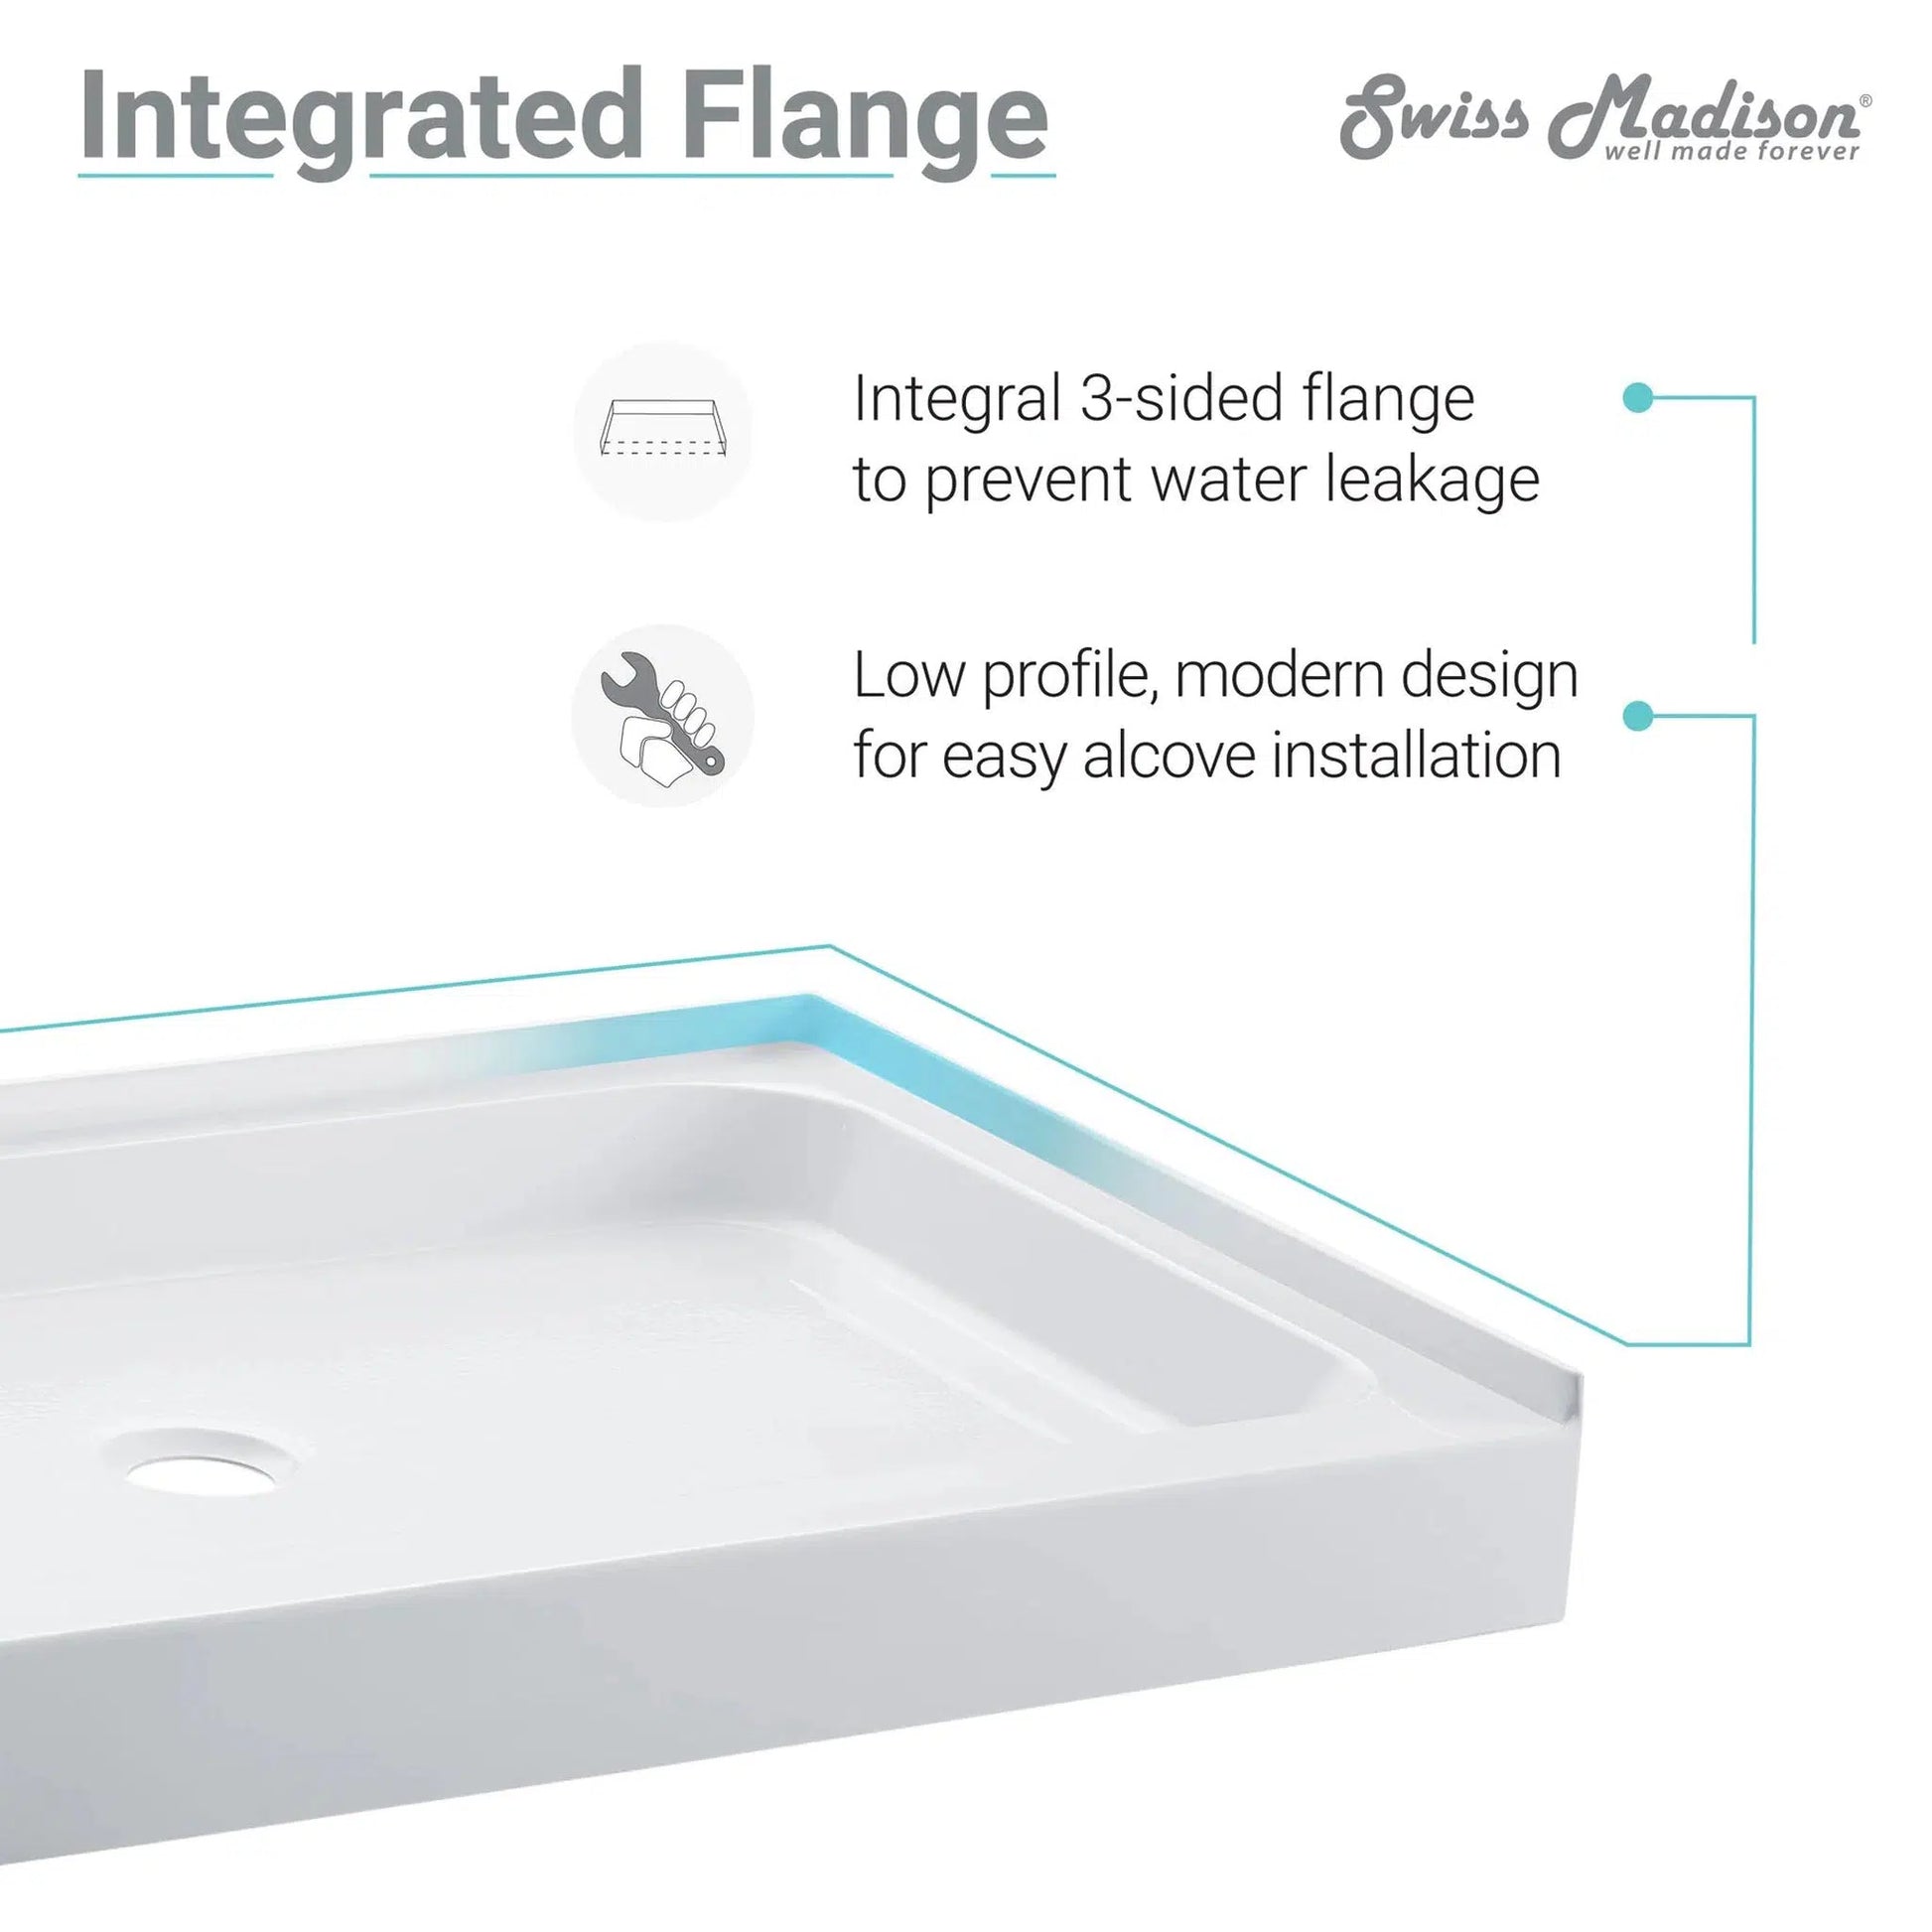 Swiss Madison Voltaire 42" x 36" Three-Wall Alcove White Center Drain Shower Base With Built-In Integral Flange